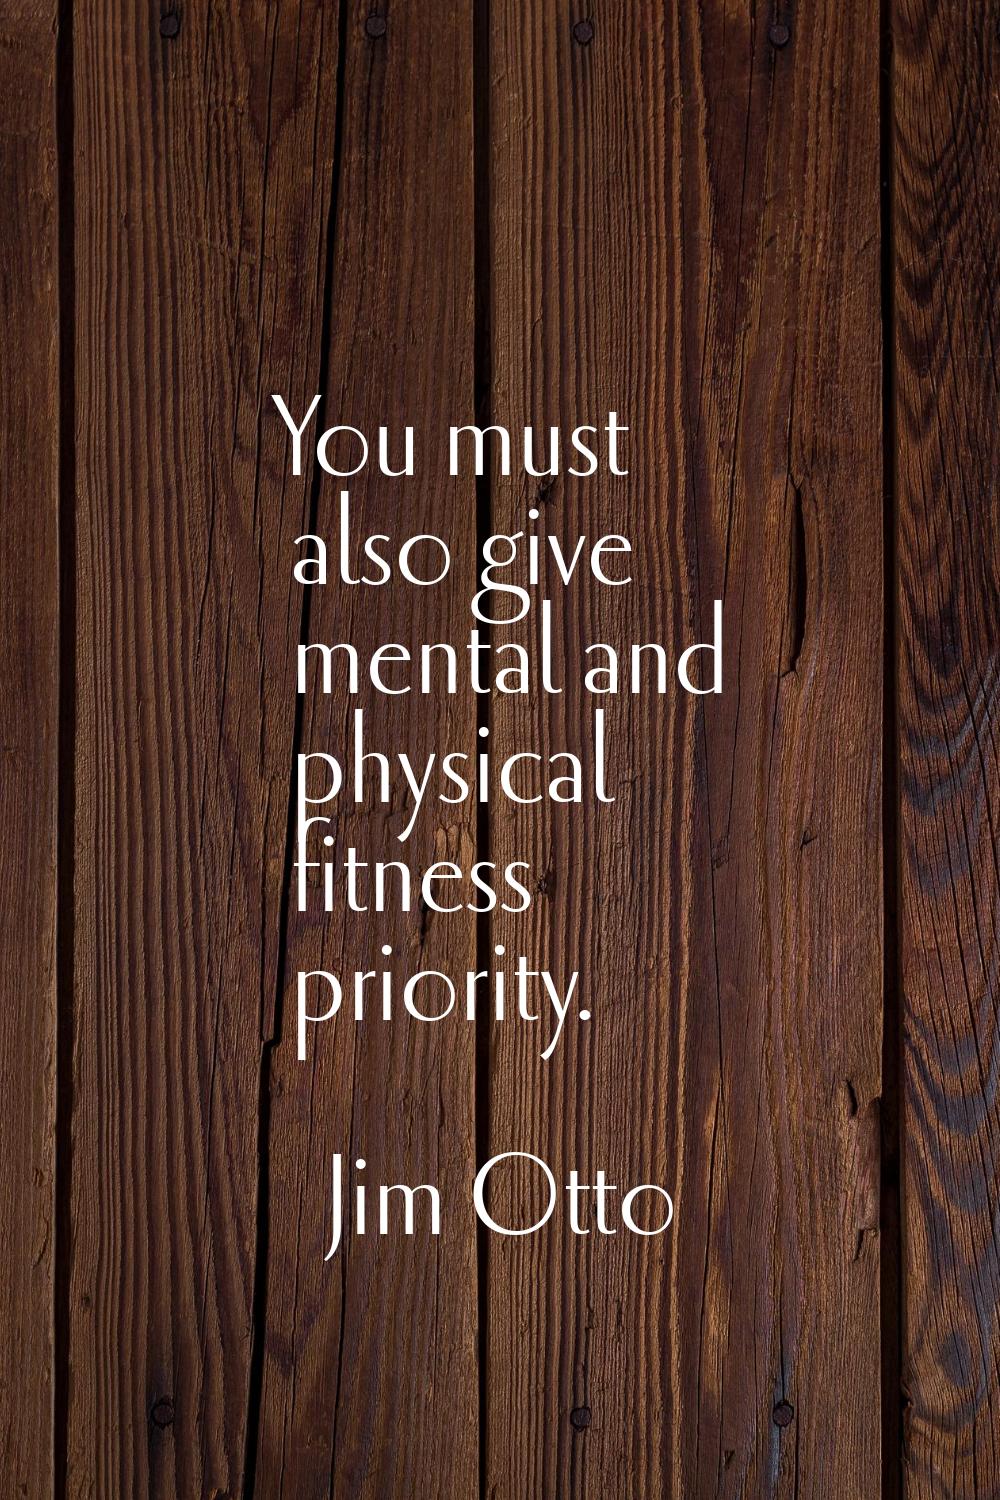 You must also give mental and physical fitness priority.